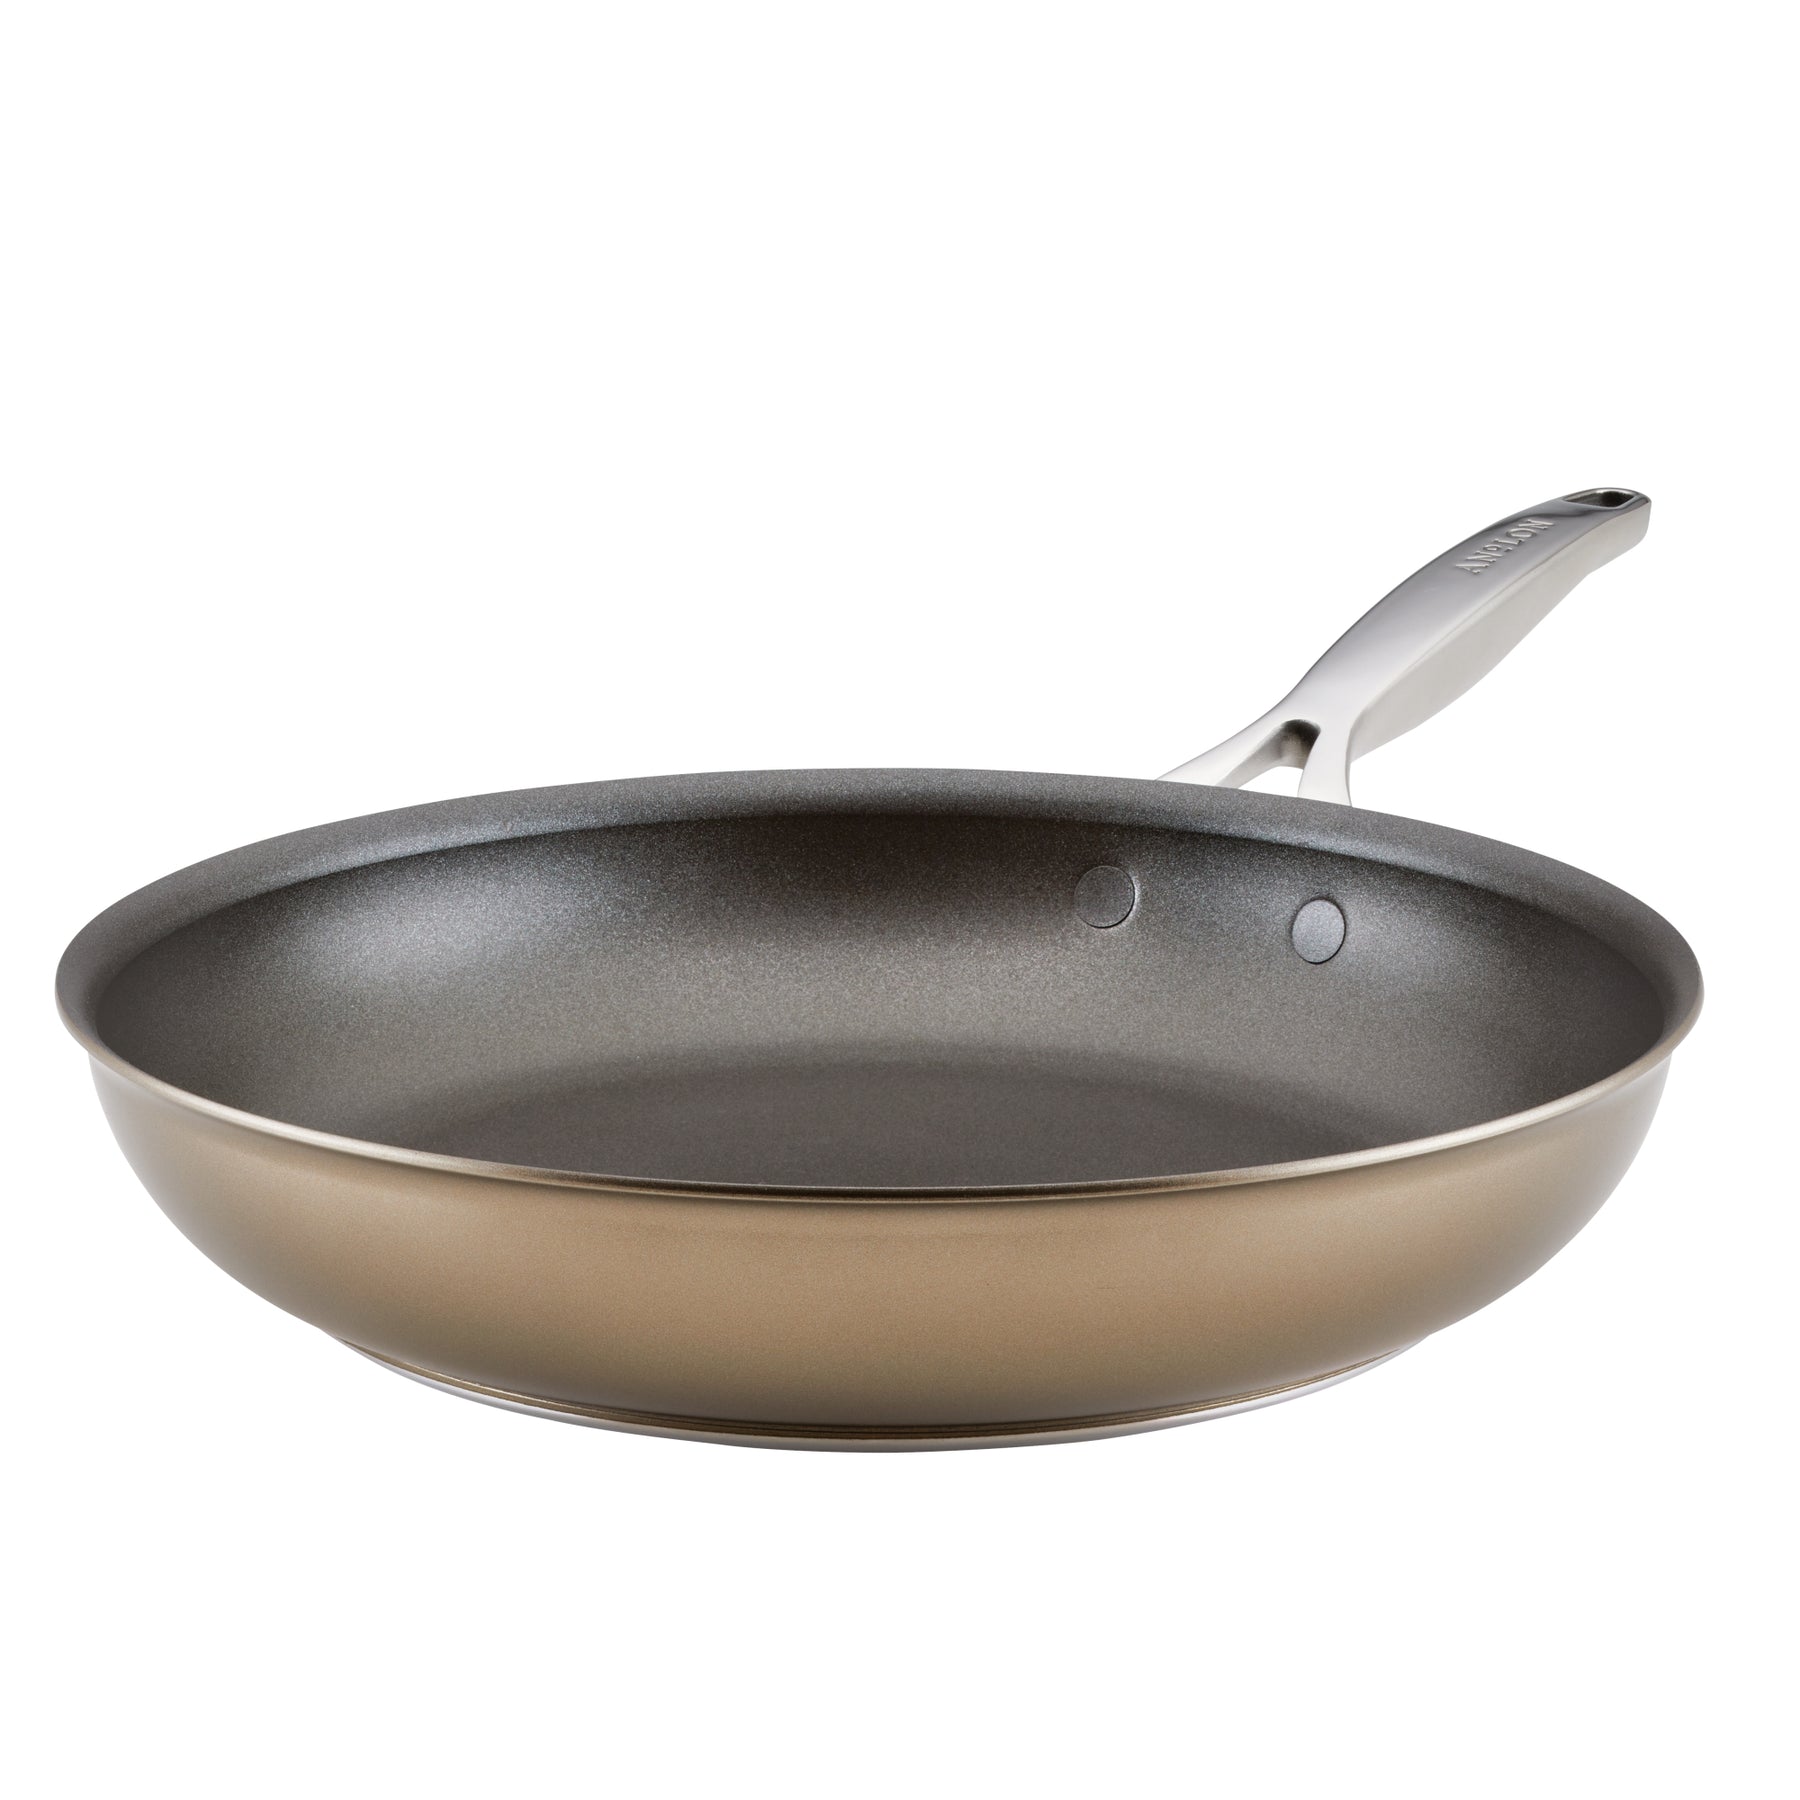 Anolon Achieve Hard Anodized Nonstick Frying Pan - Cream - 8.25 in